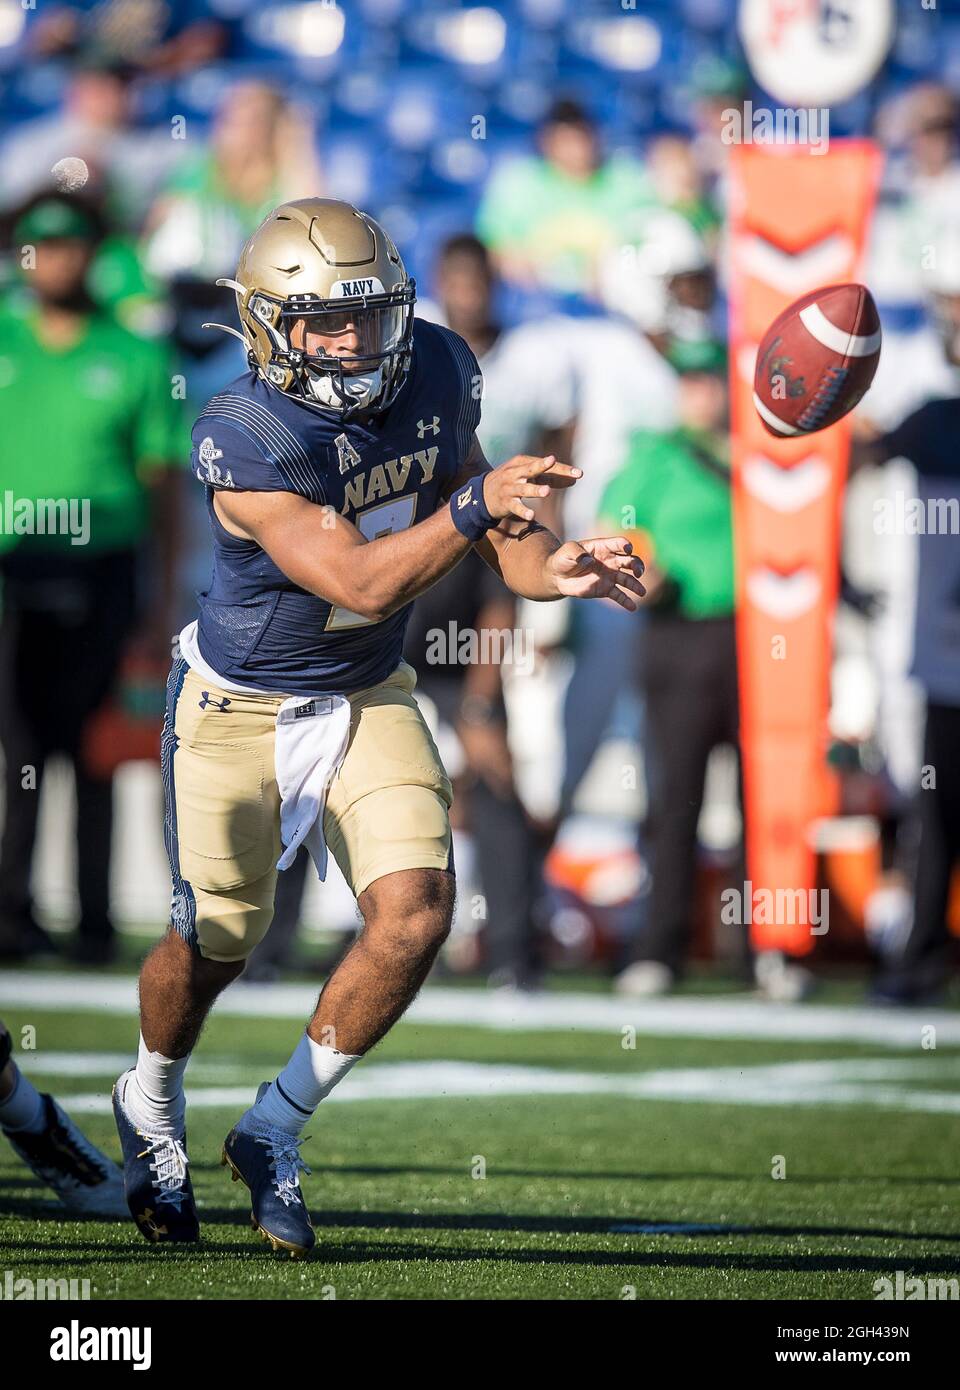 September 4, 2021: Navy Midshipmen quarterback Xavier Arline (7) opts to pitch the ball during the regular season opening game between the Marshall Thundering Herd and the Navy Midshipmen at Navy-Marine Corps Memorial Stadium in Annapolis, Maryland Photographer: Cory Royster Stock Photo